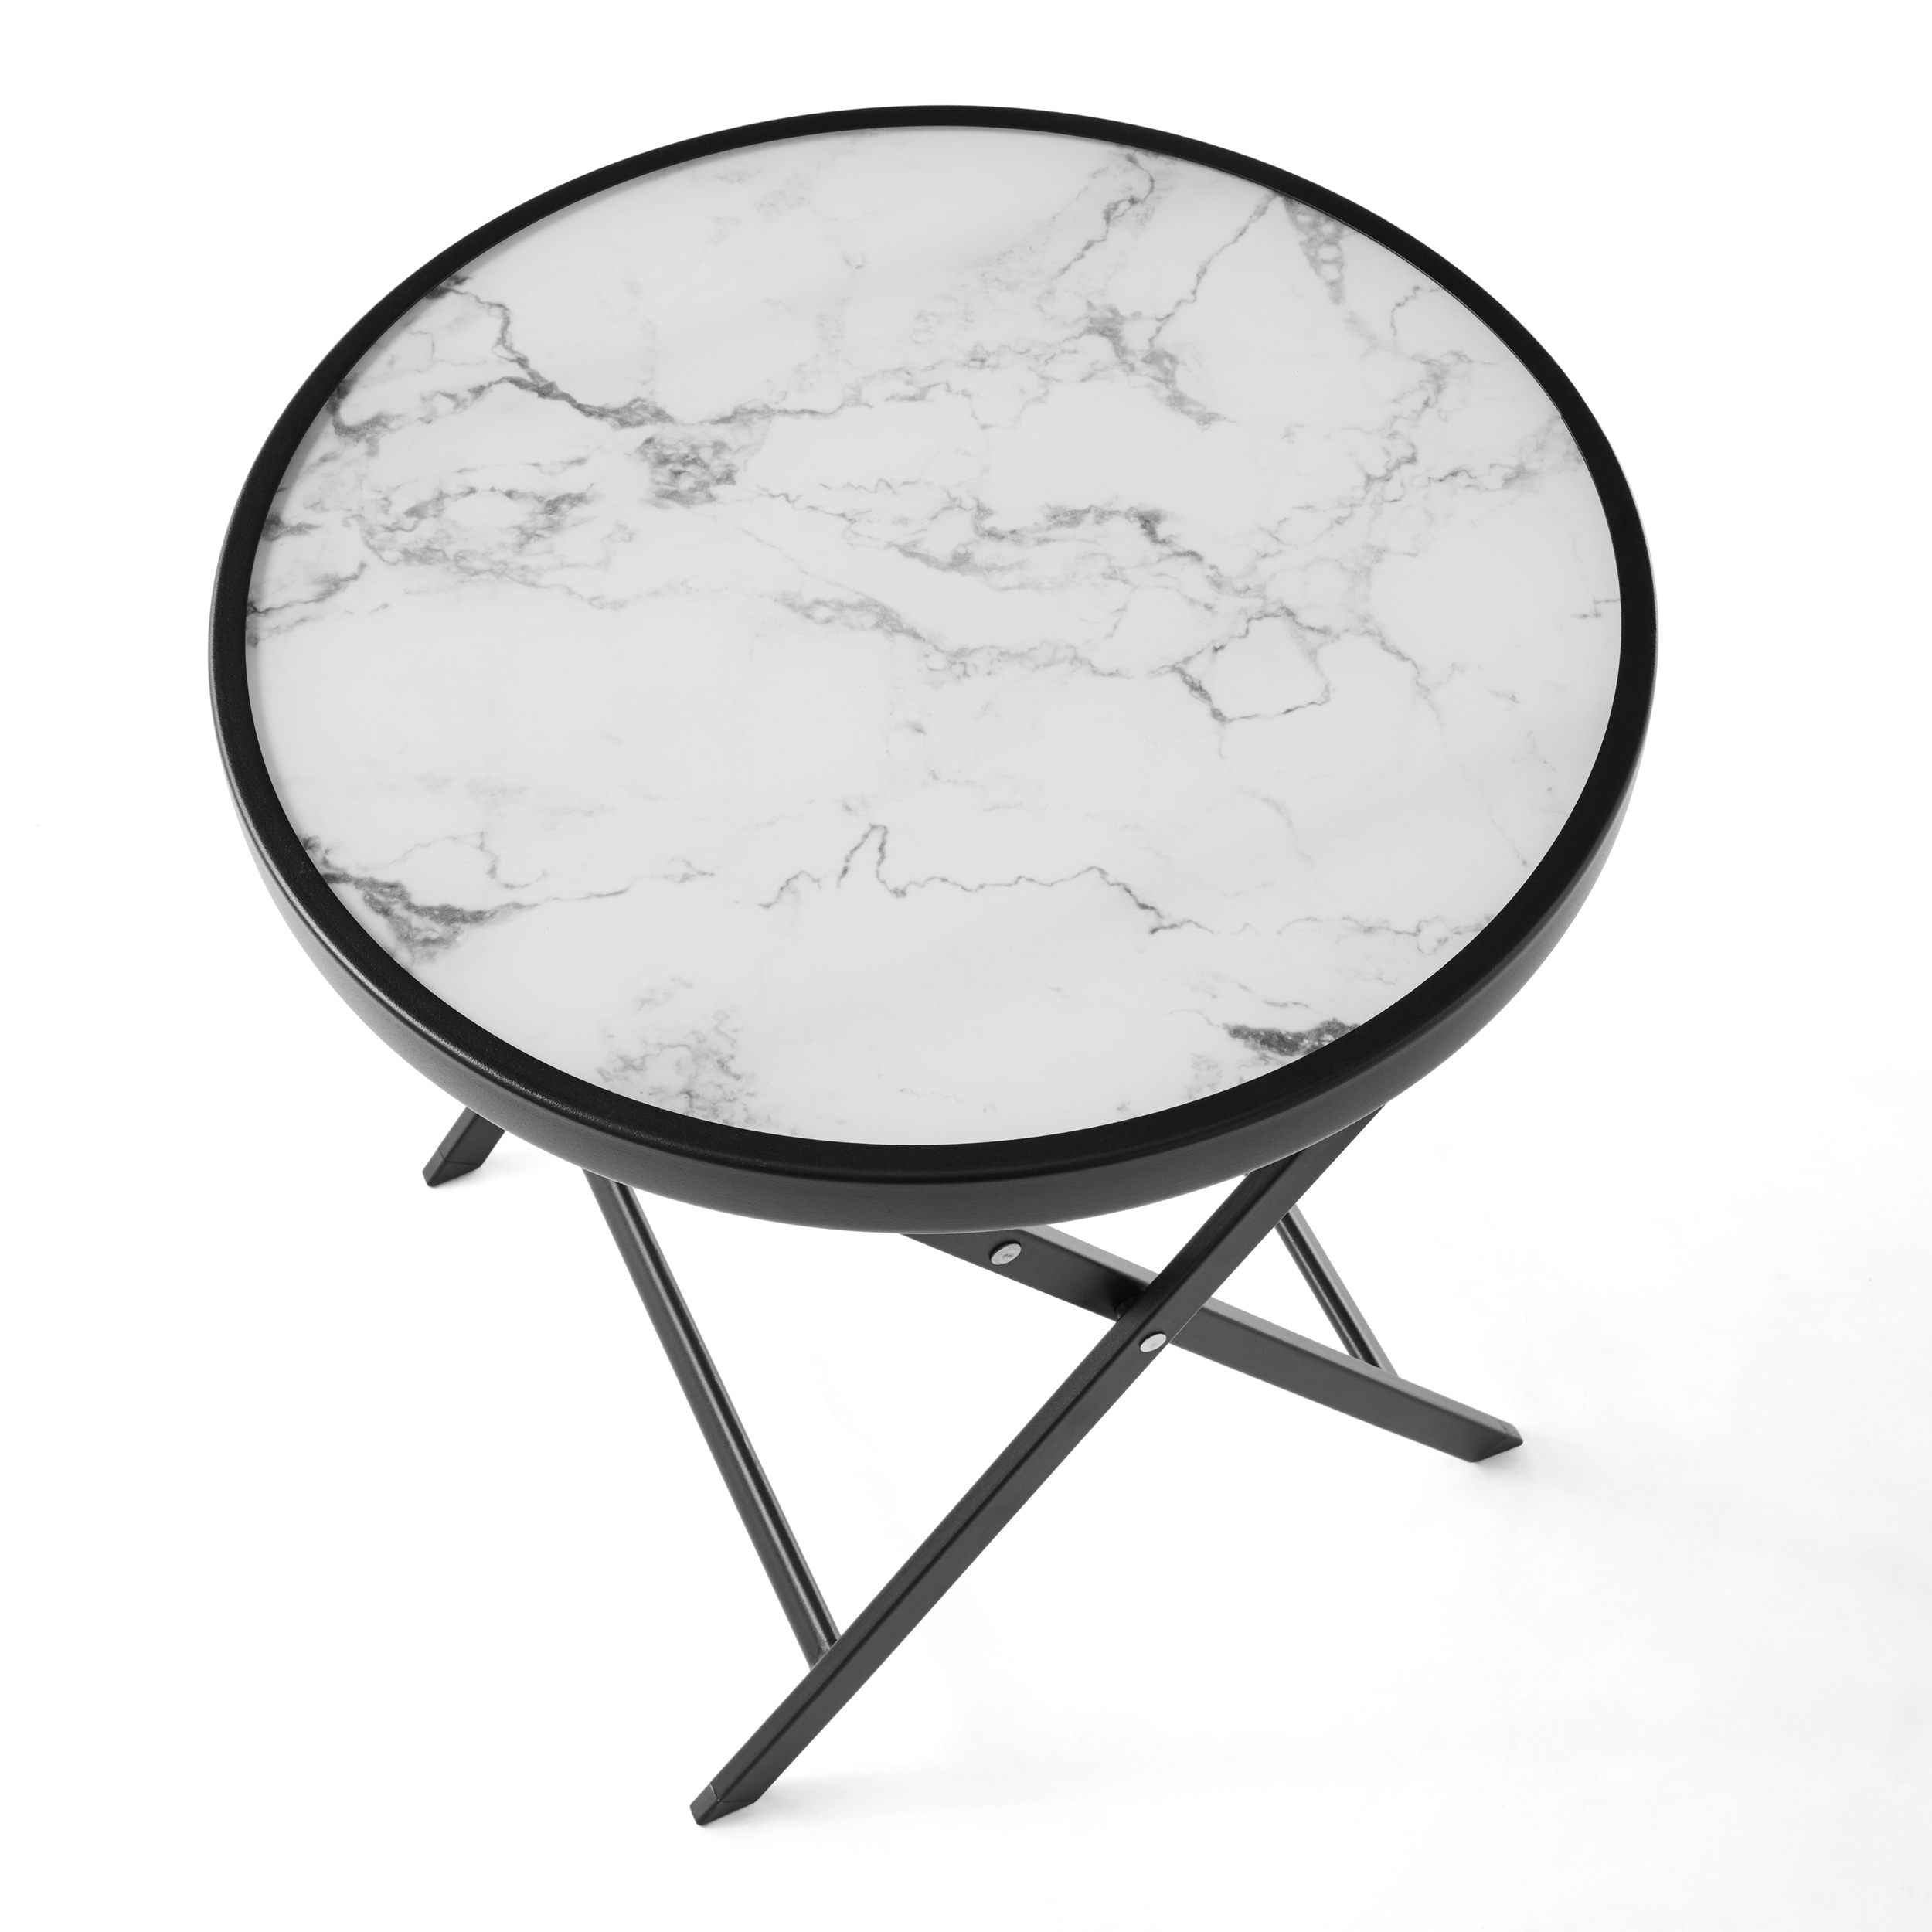 Mainstays 18" Greyson Square White Marble Steel Round Folding Table - image 3 of 7